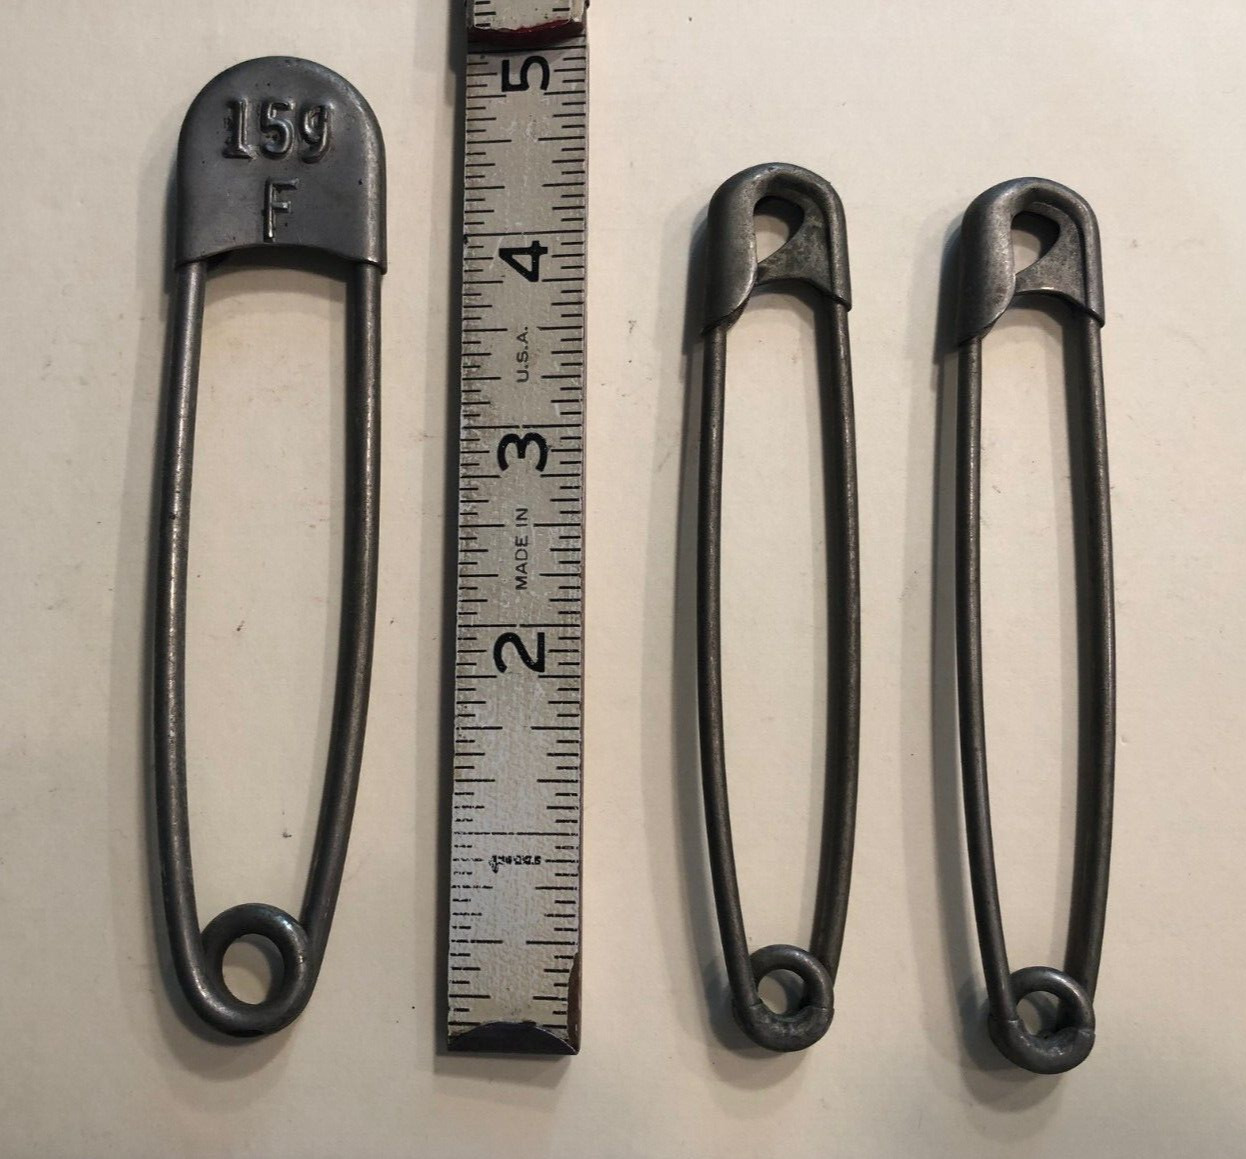 3 vintage large non-magnetic safety/laundry/military pins or key tags 1 numbered